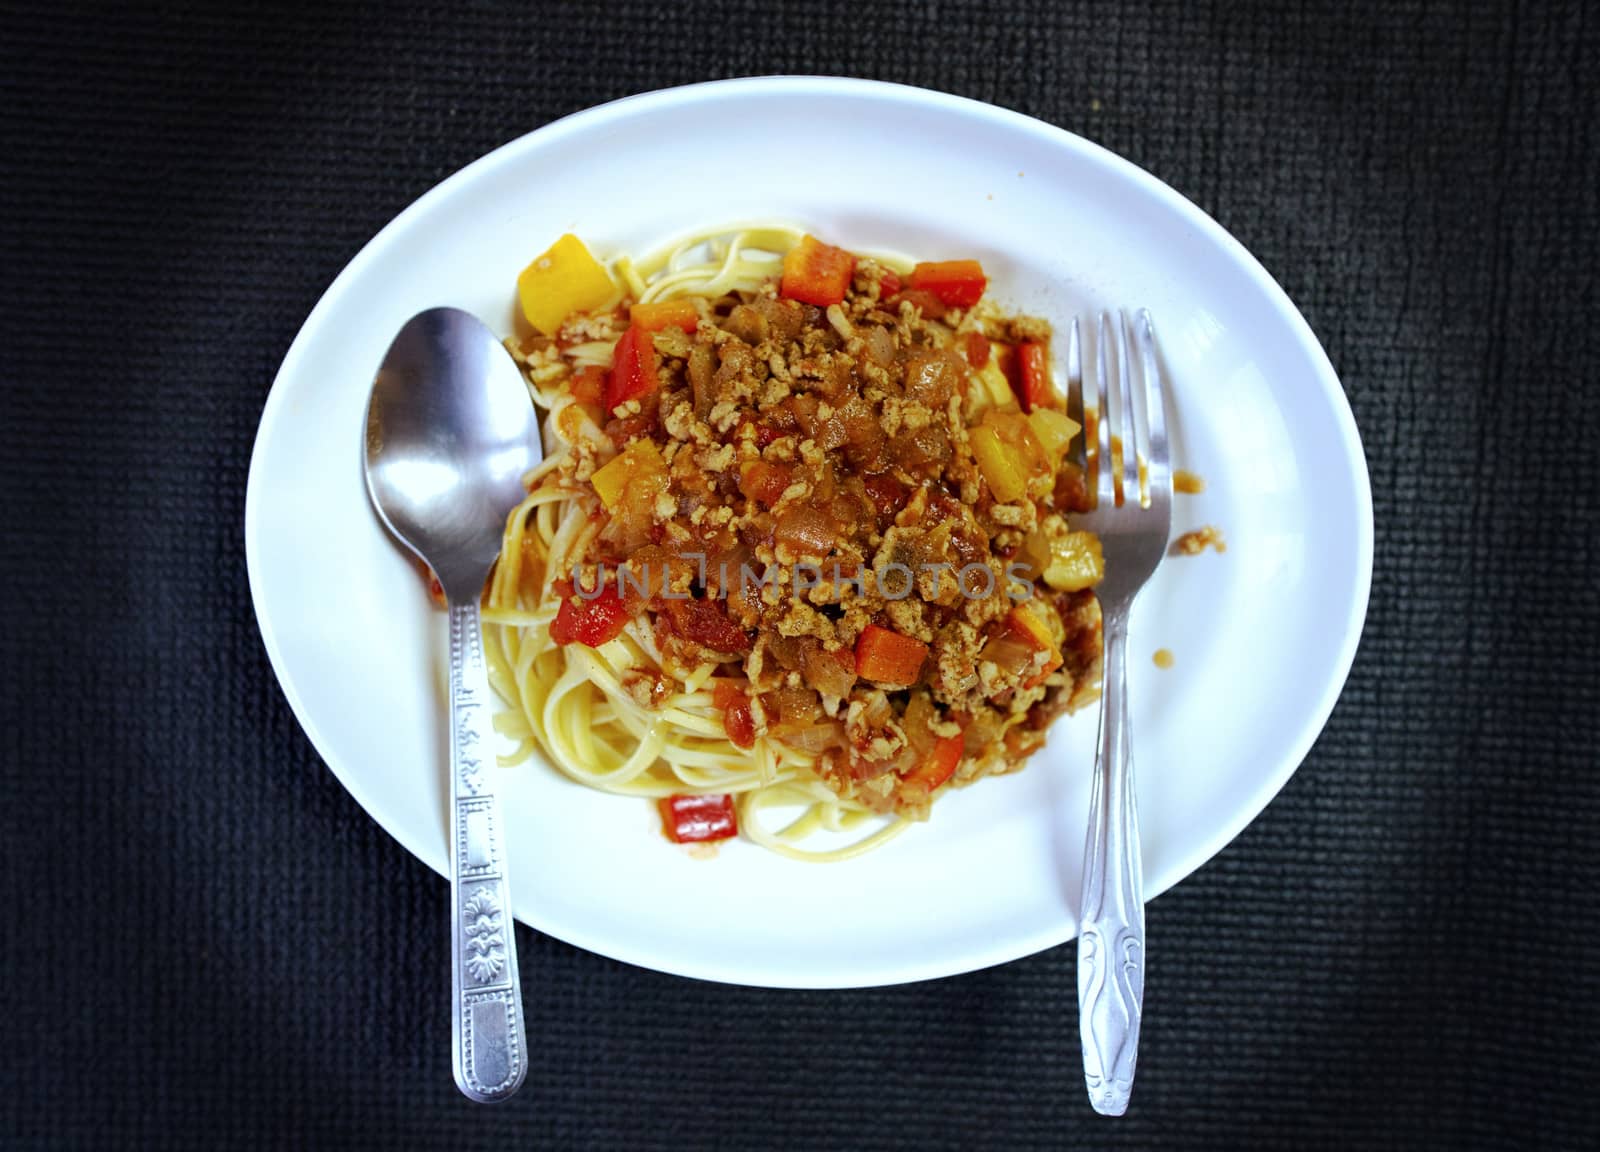 Vintage image of pork chop spaghetti, applied Thai style, top fr by noppha80